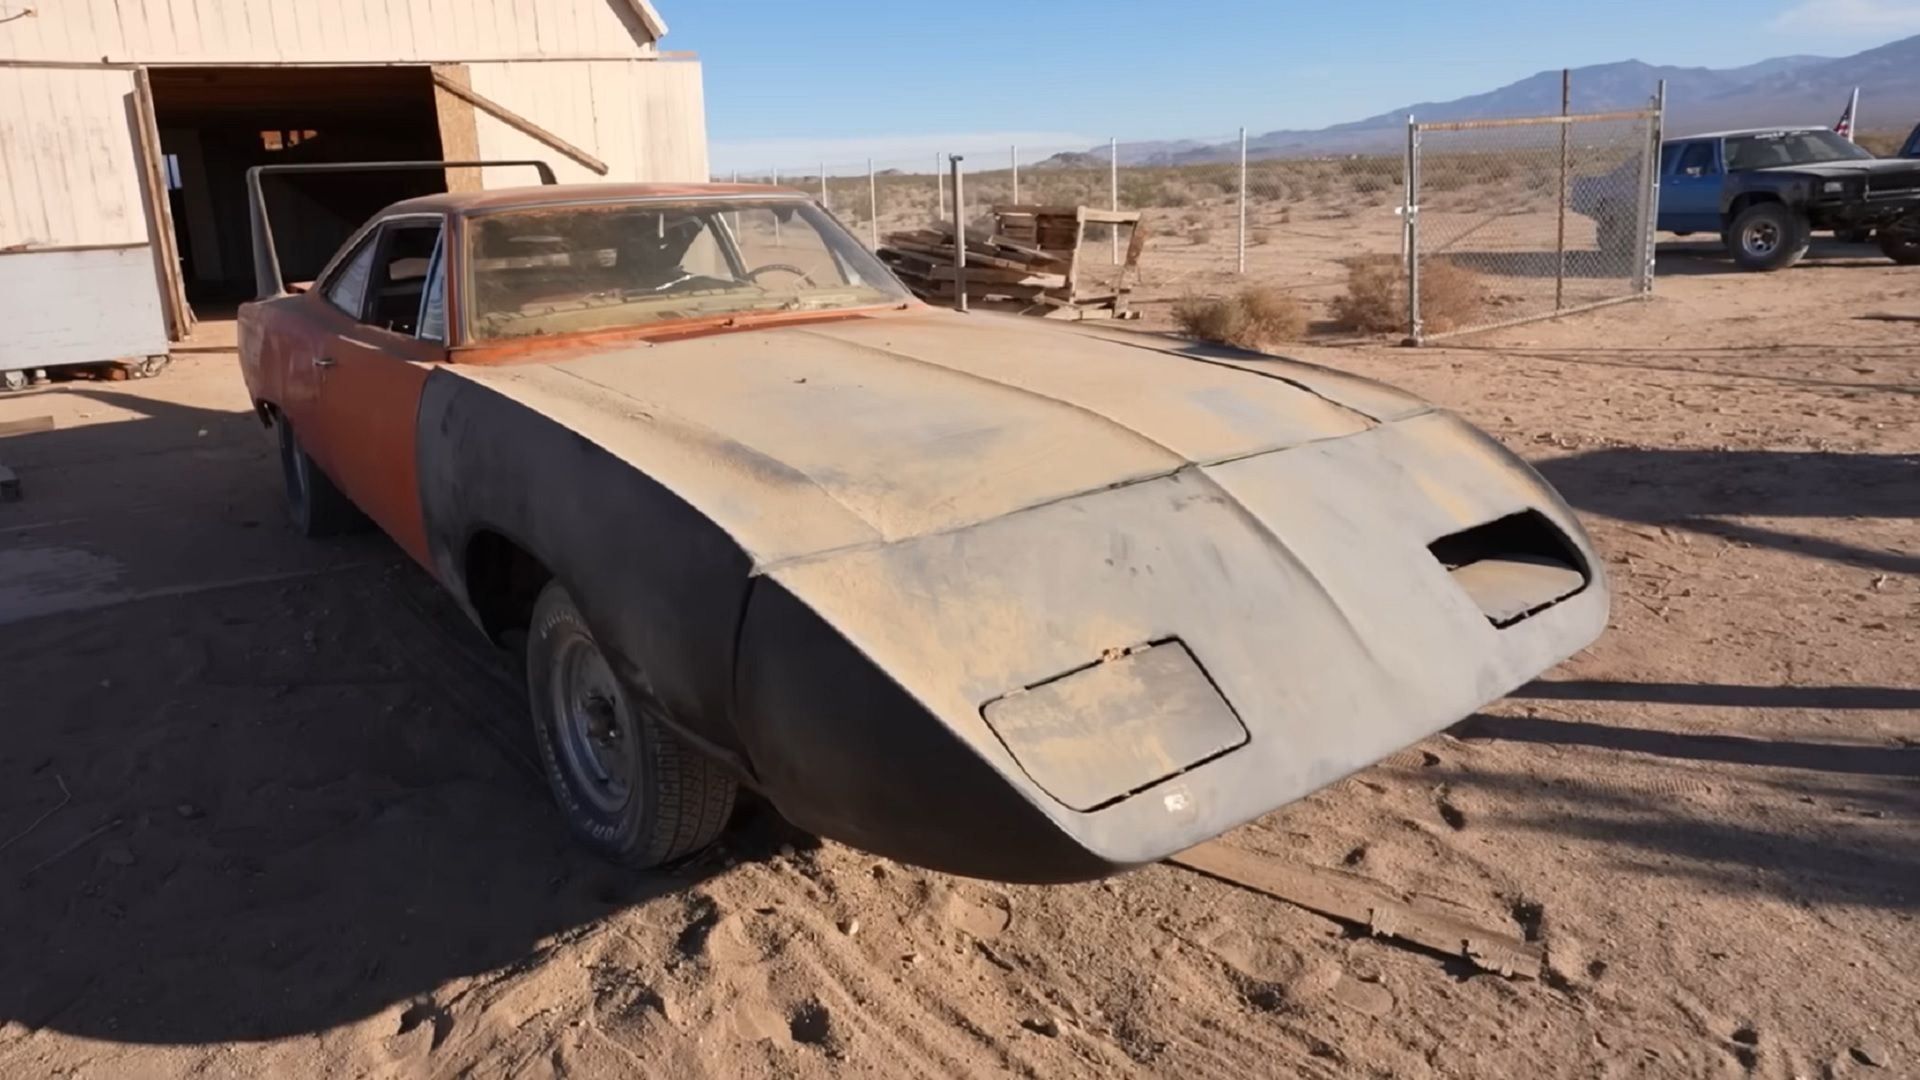 Rusted 1969 Plymouth Superbird outside